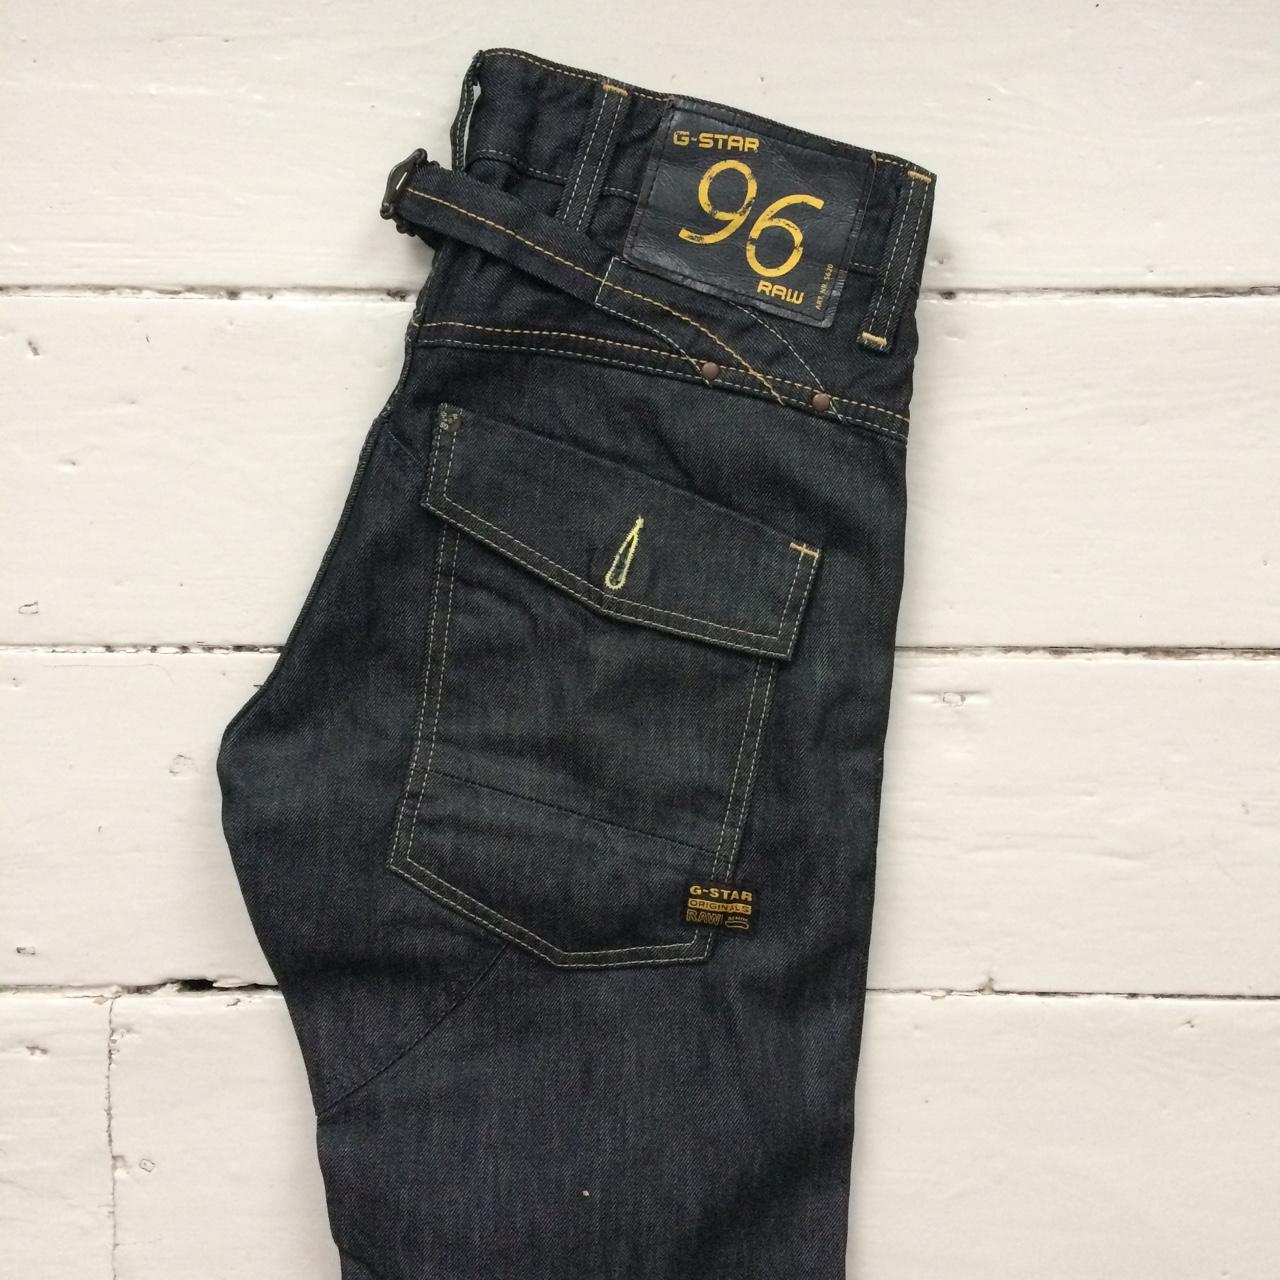 Gstar 96 as new condition 30/32L never been worn, ... -